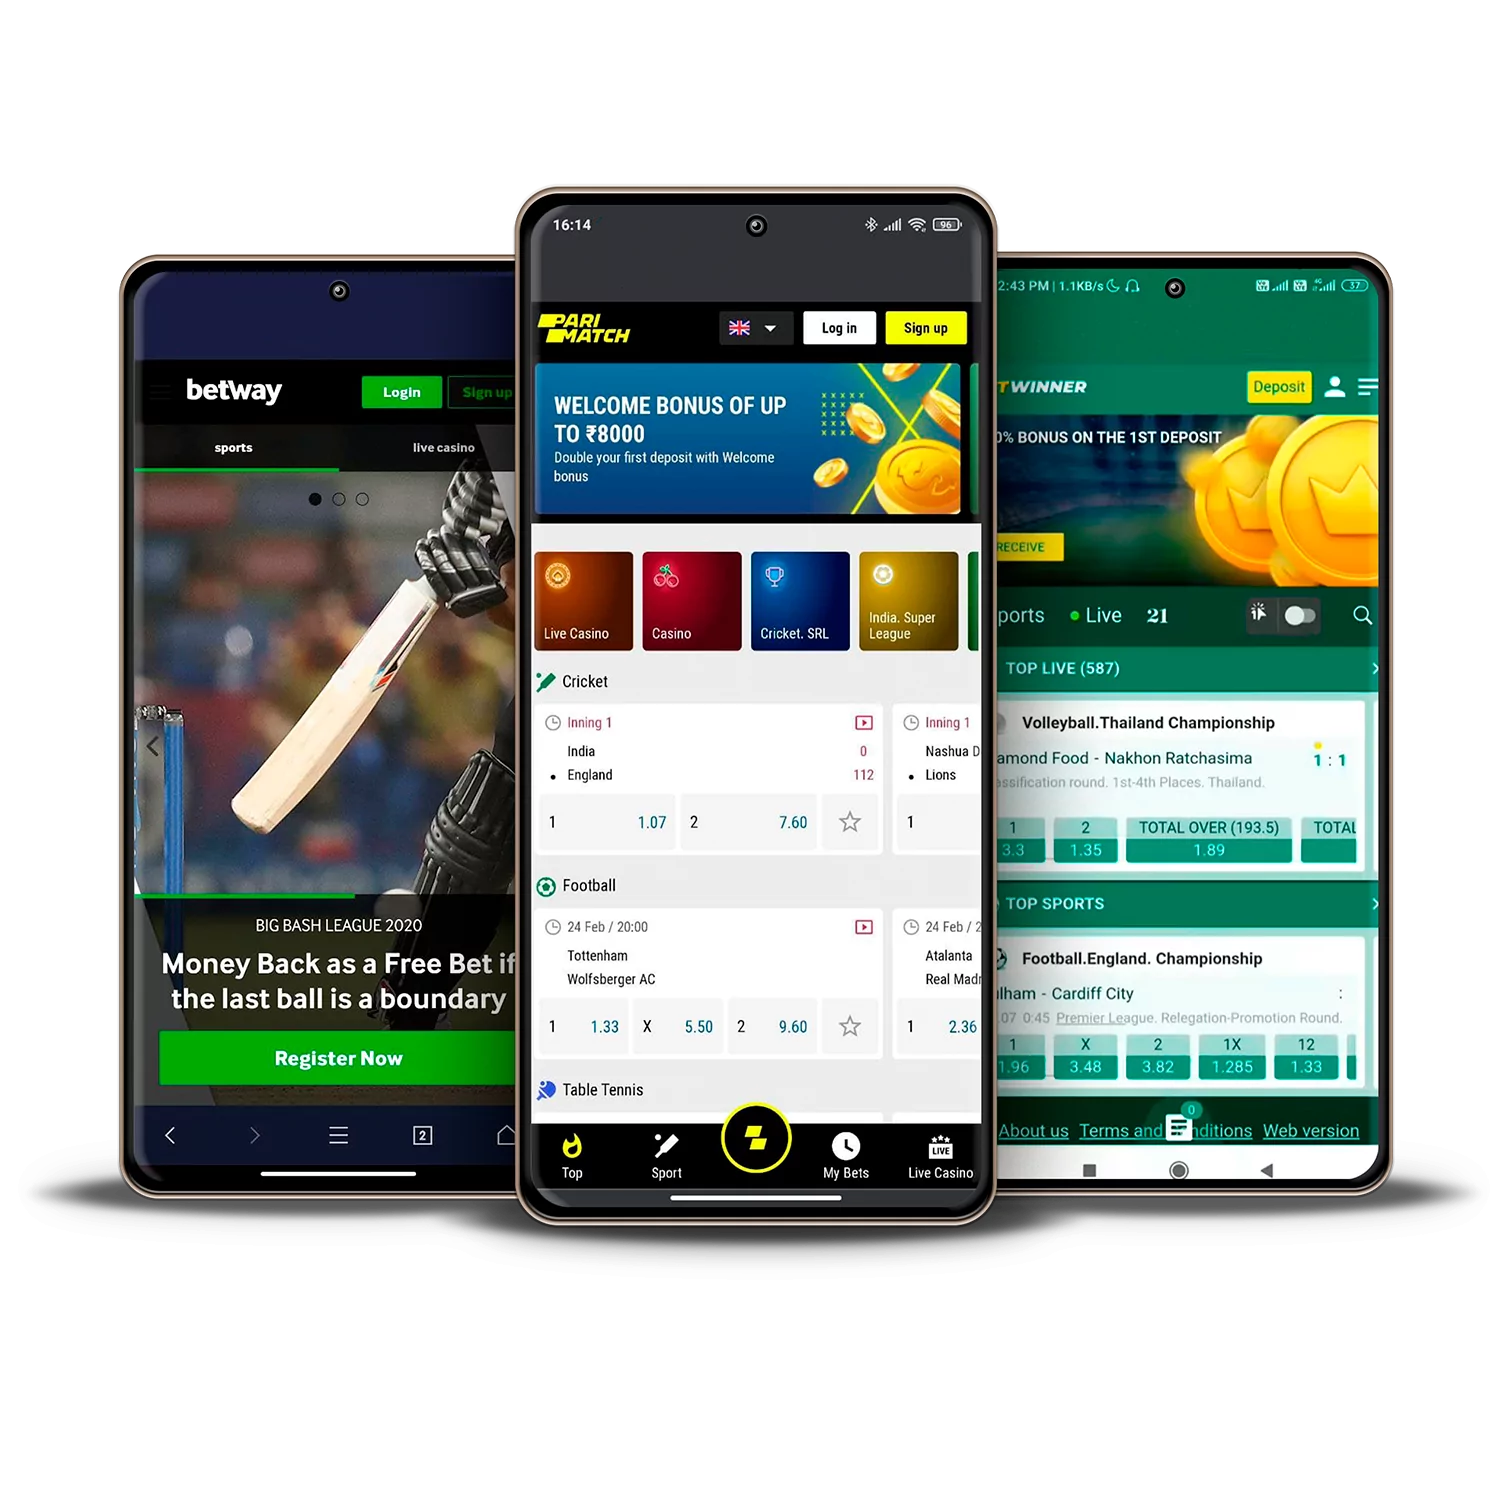 Indian Cricket Betting App Consulting – What The Heck Is That?